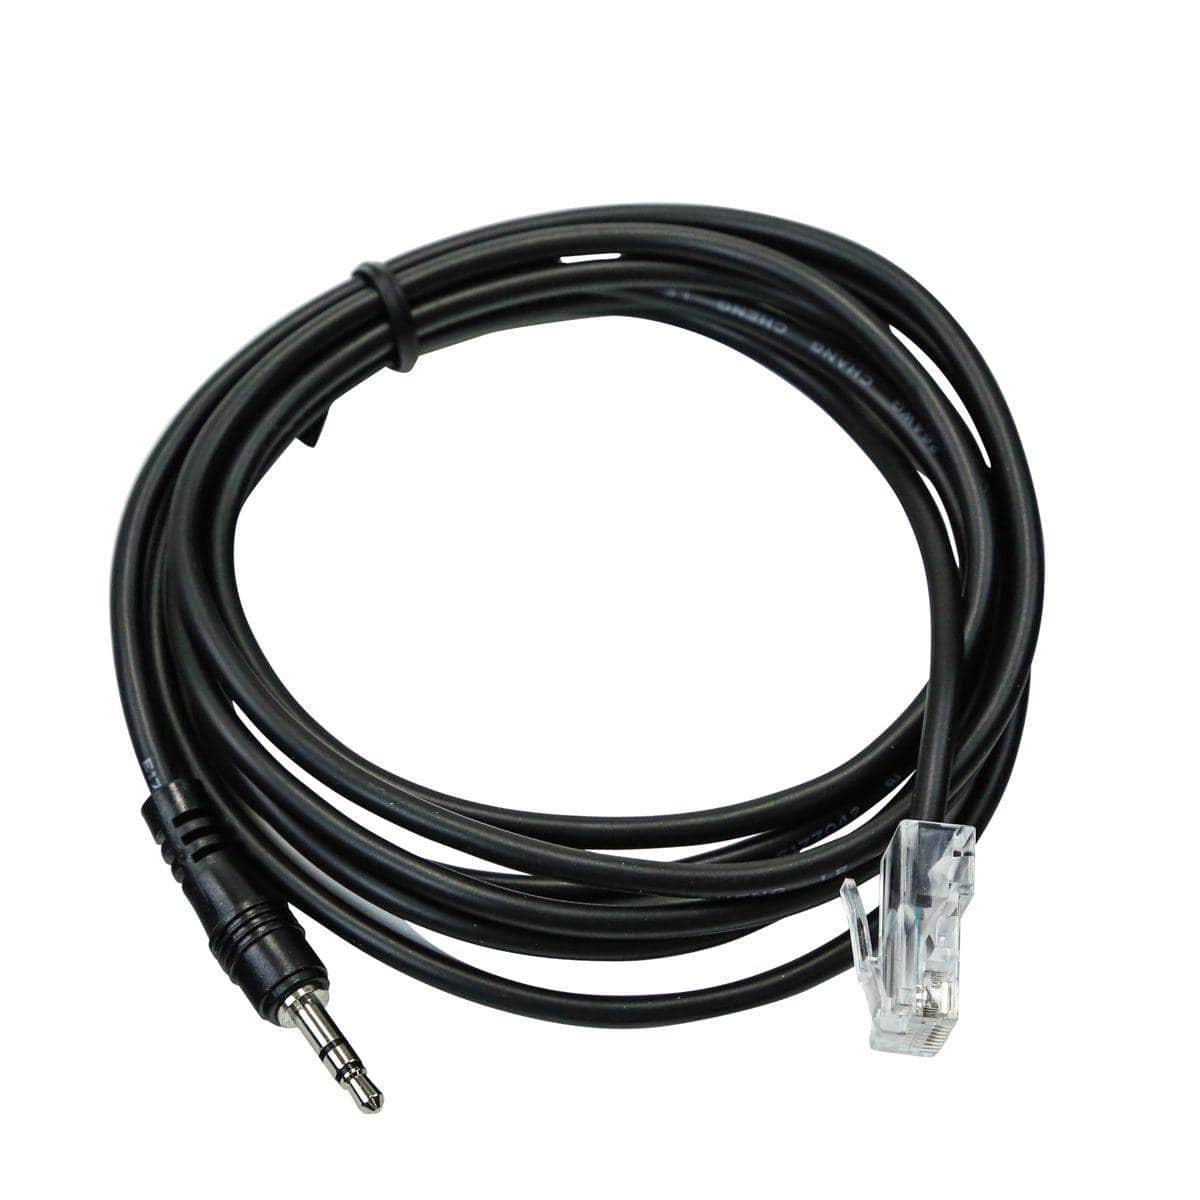 Kessil to Neptune Apex Control Cable - Kessil